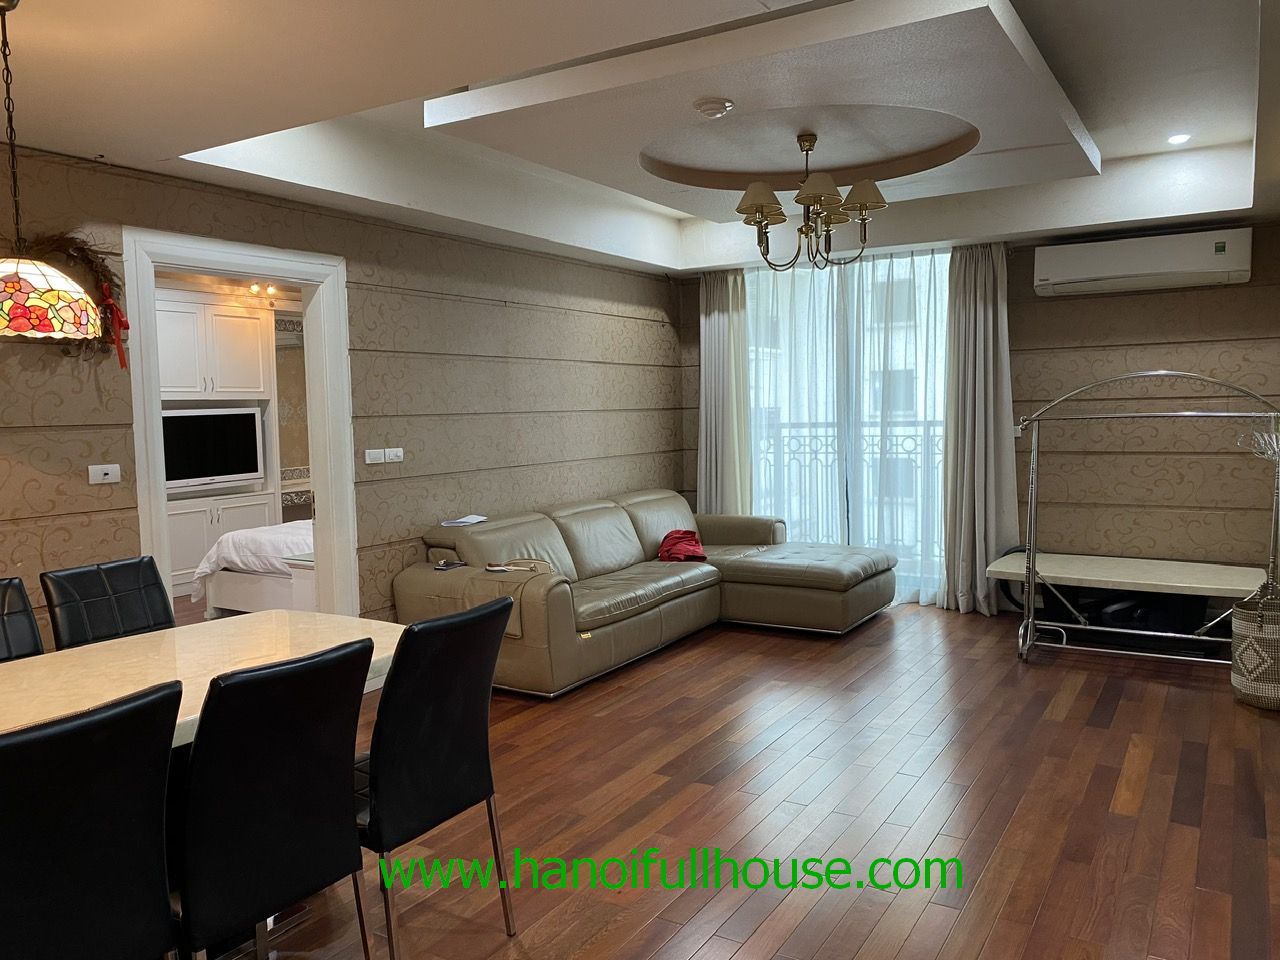 Let to rent nice apartment with 2 bedrooms in Pacific Place- 83 Ly Thuong Kiet